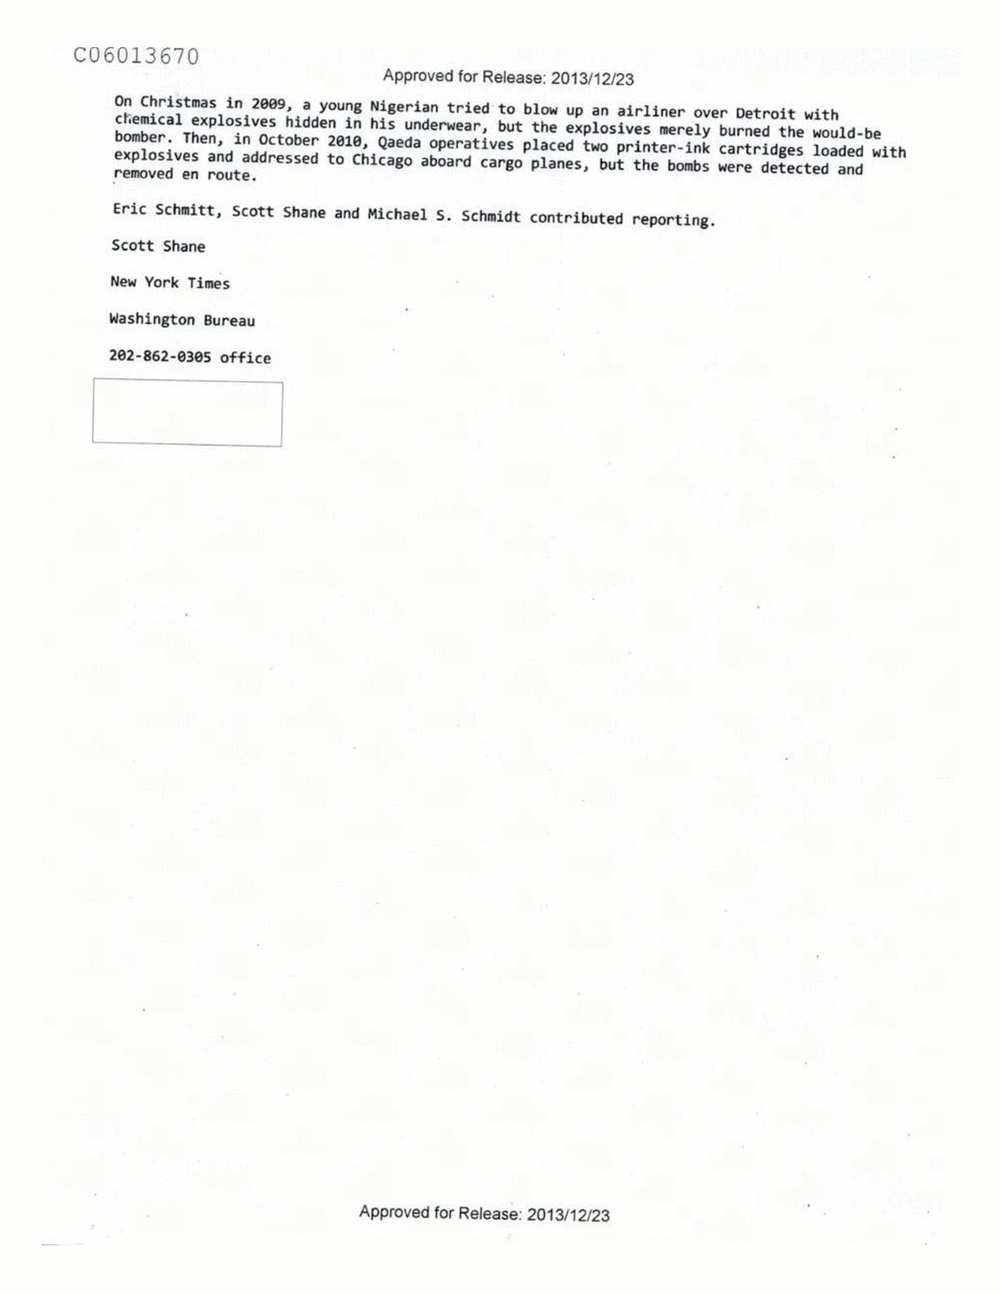 Page 520 from Email Correspondence Between Reporters and CIA Flacks